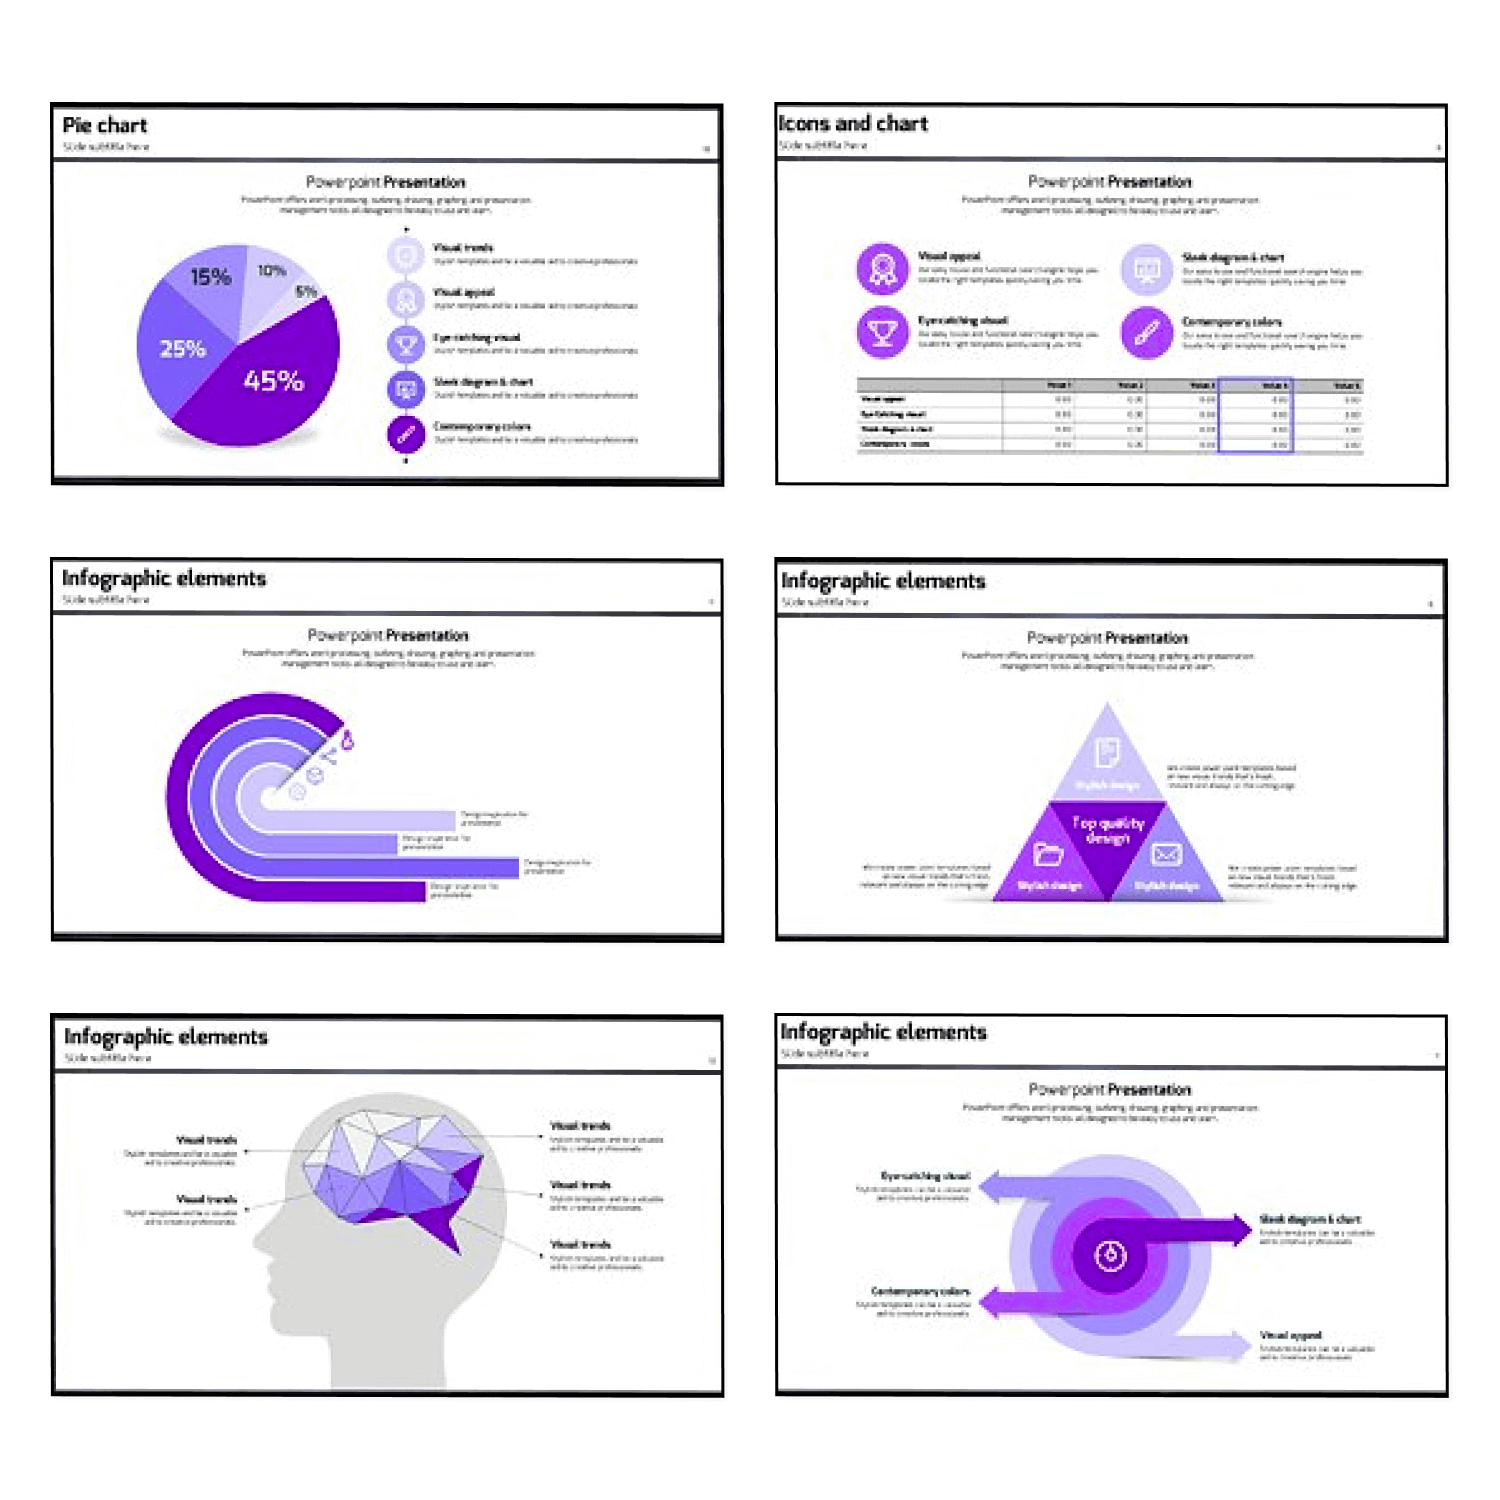 Pie Chart, Icons and Chart, Infographic Elements.